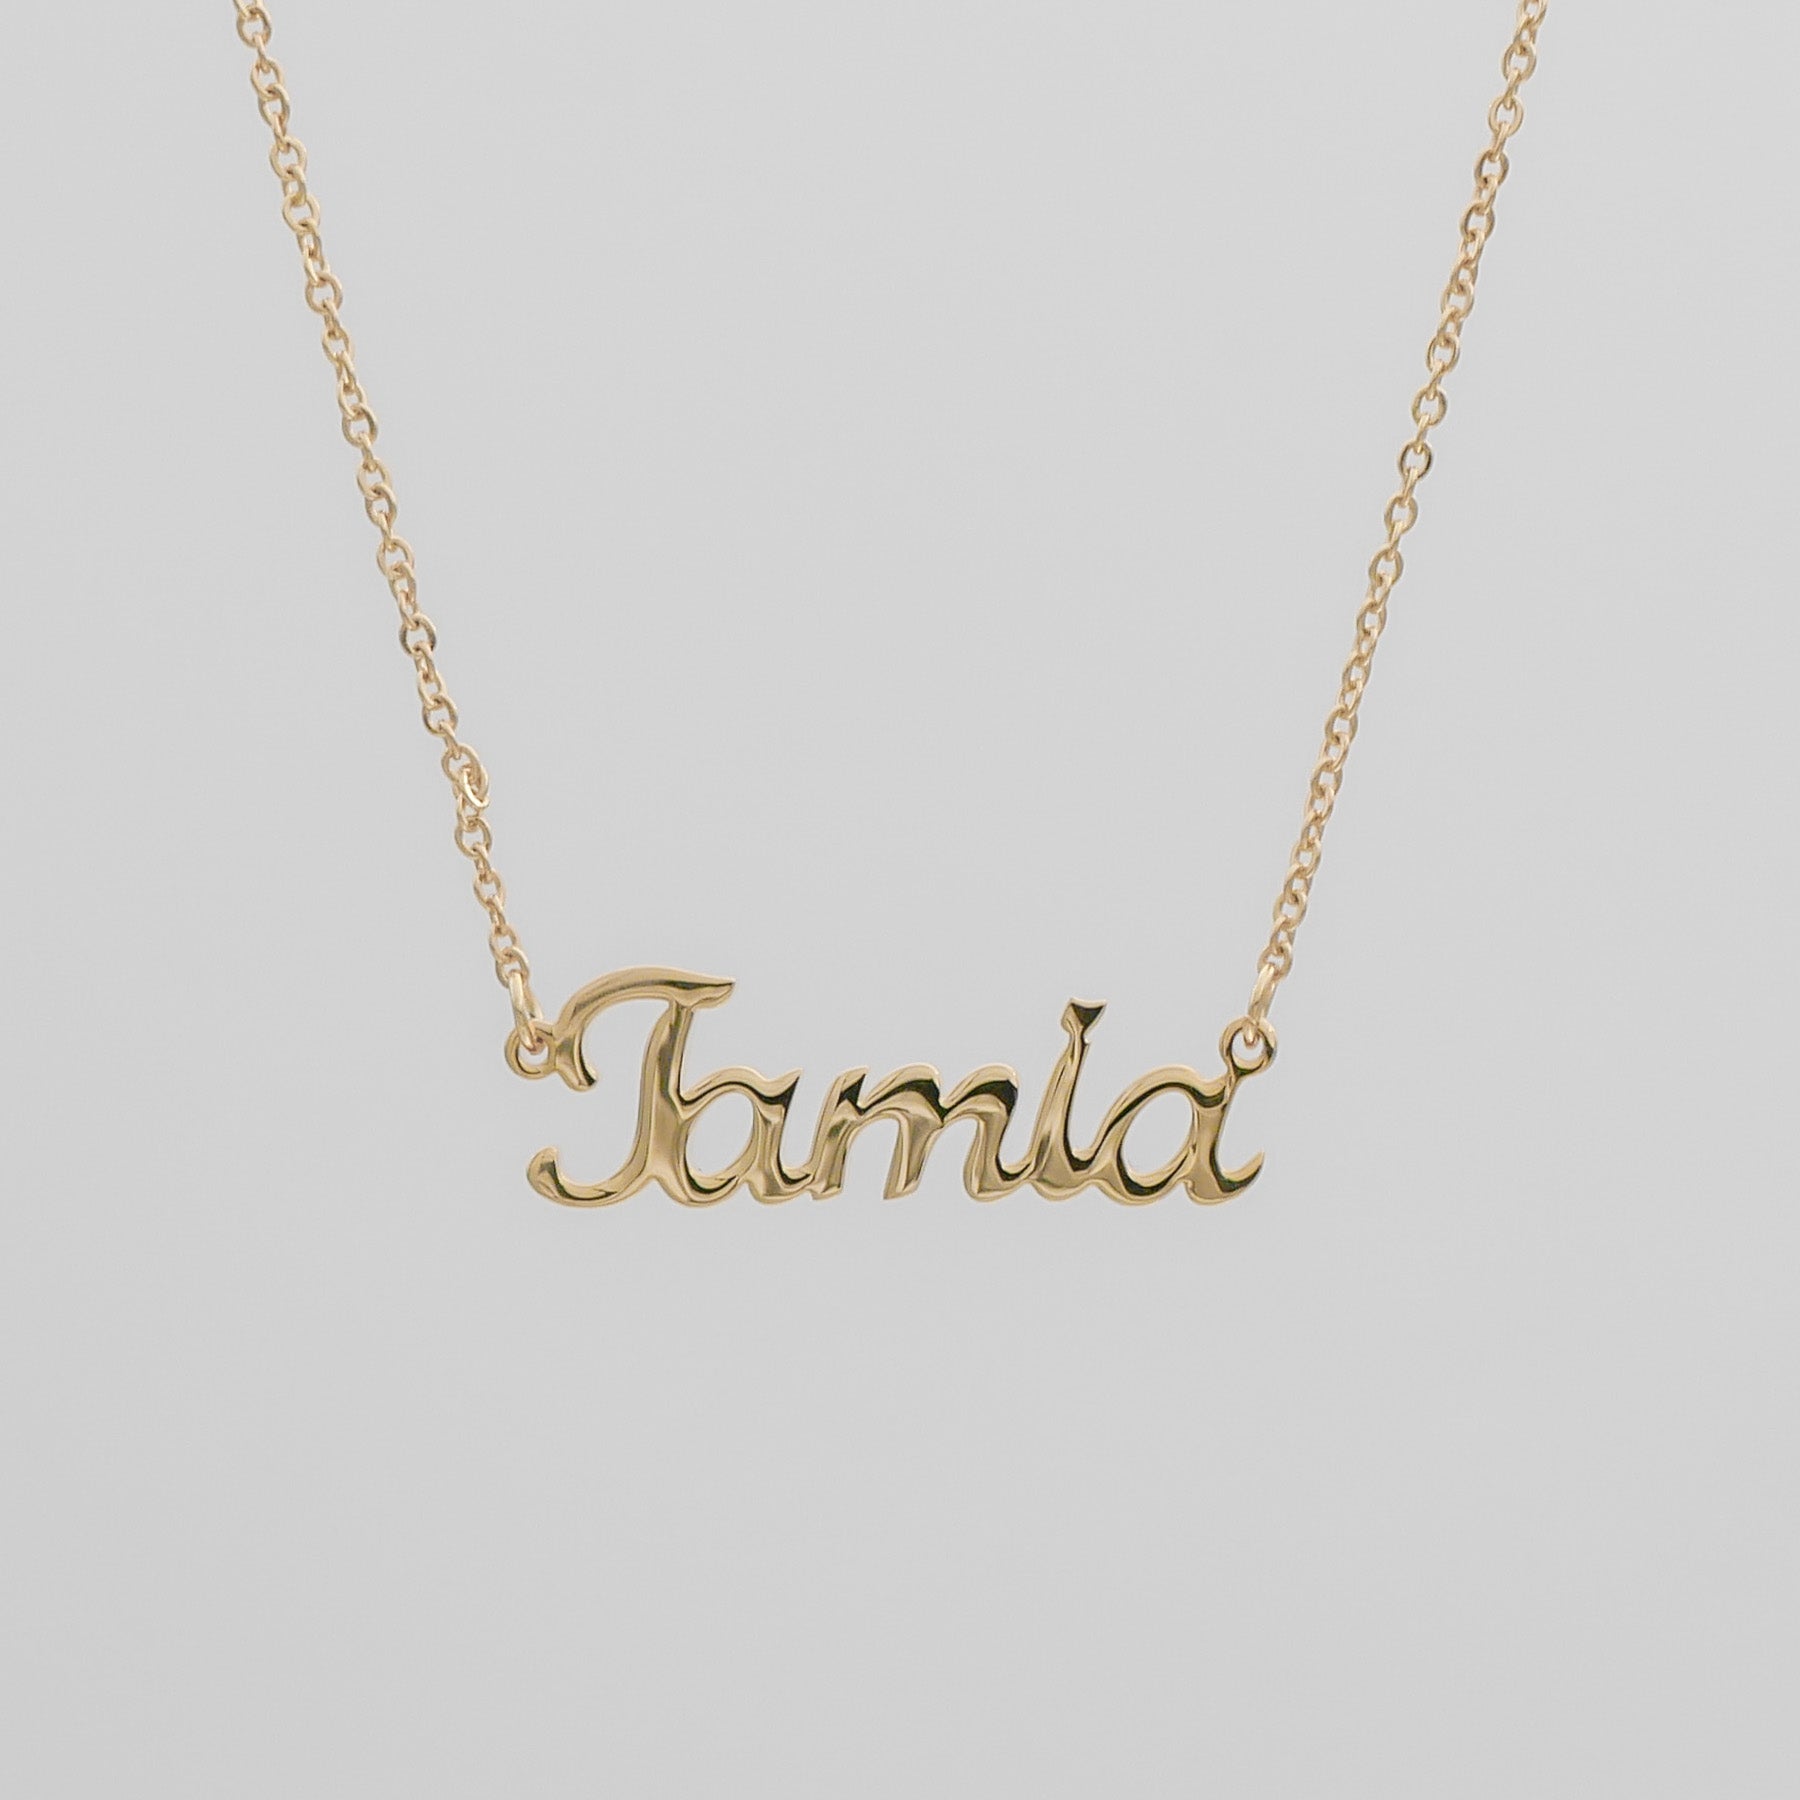 Gold custom name necklace with classic link chain